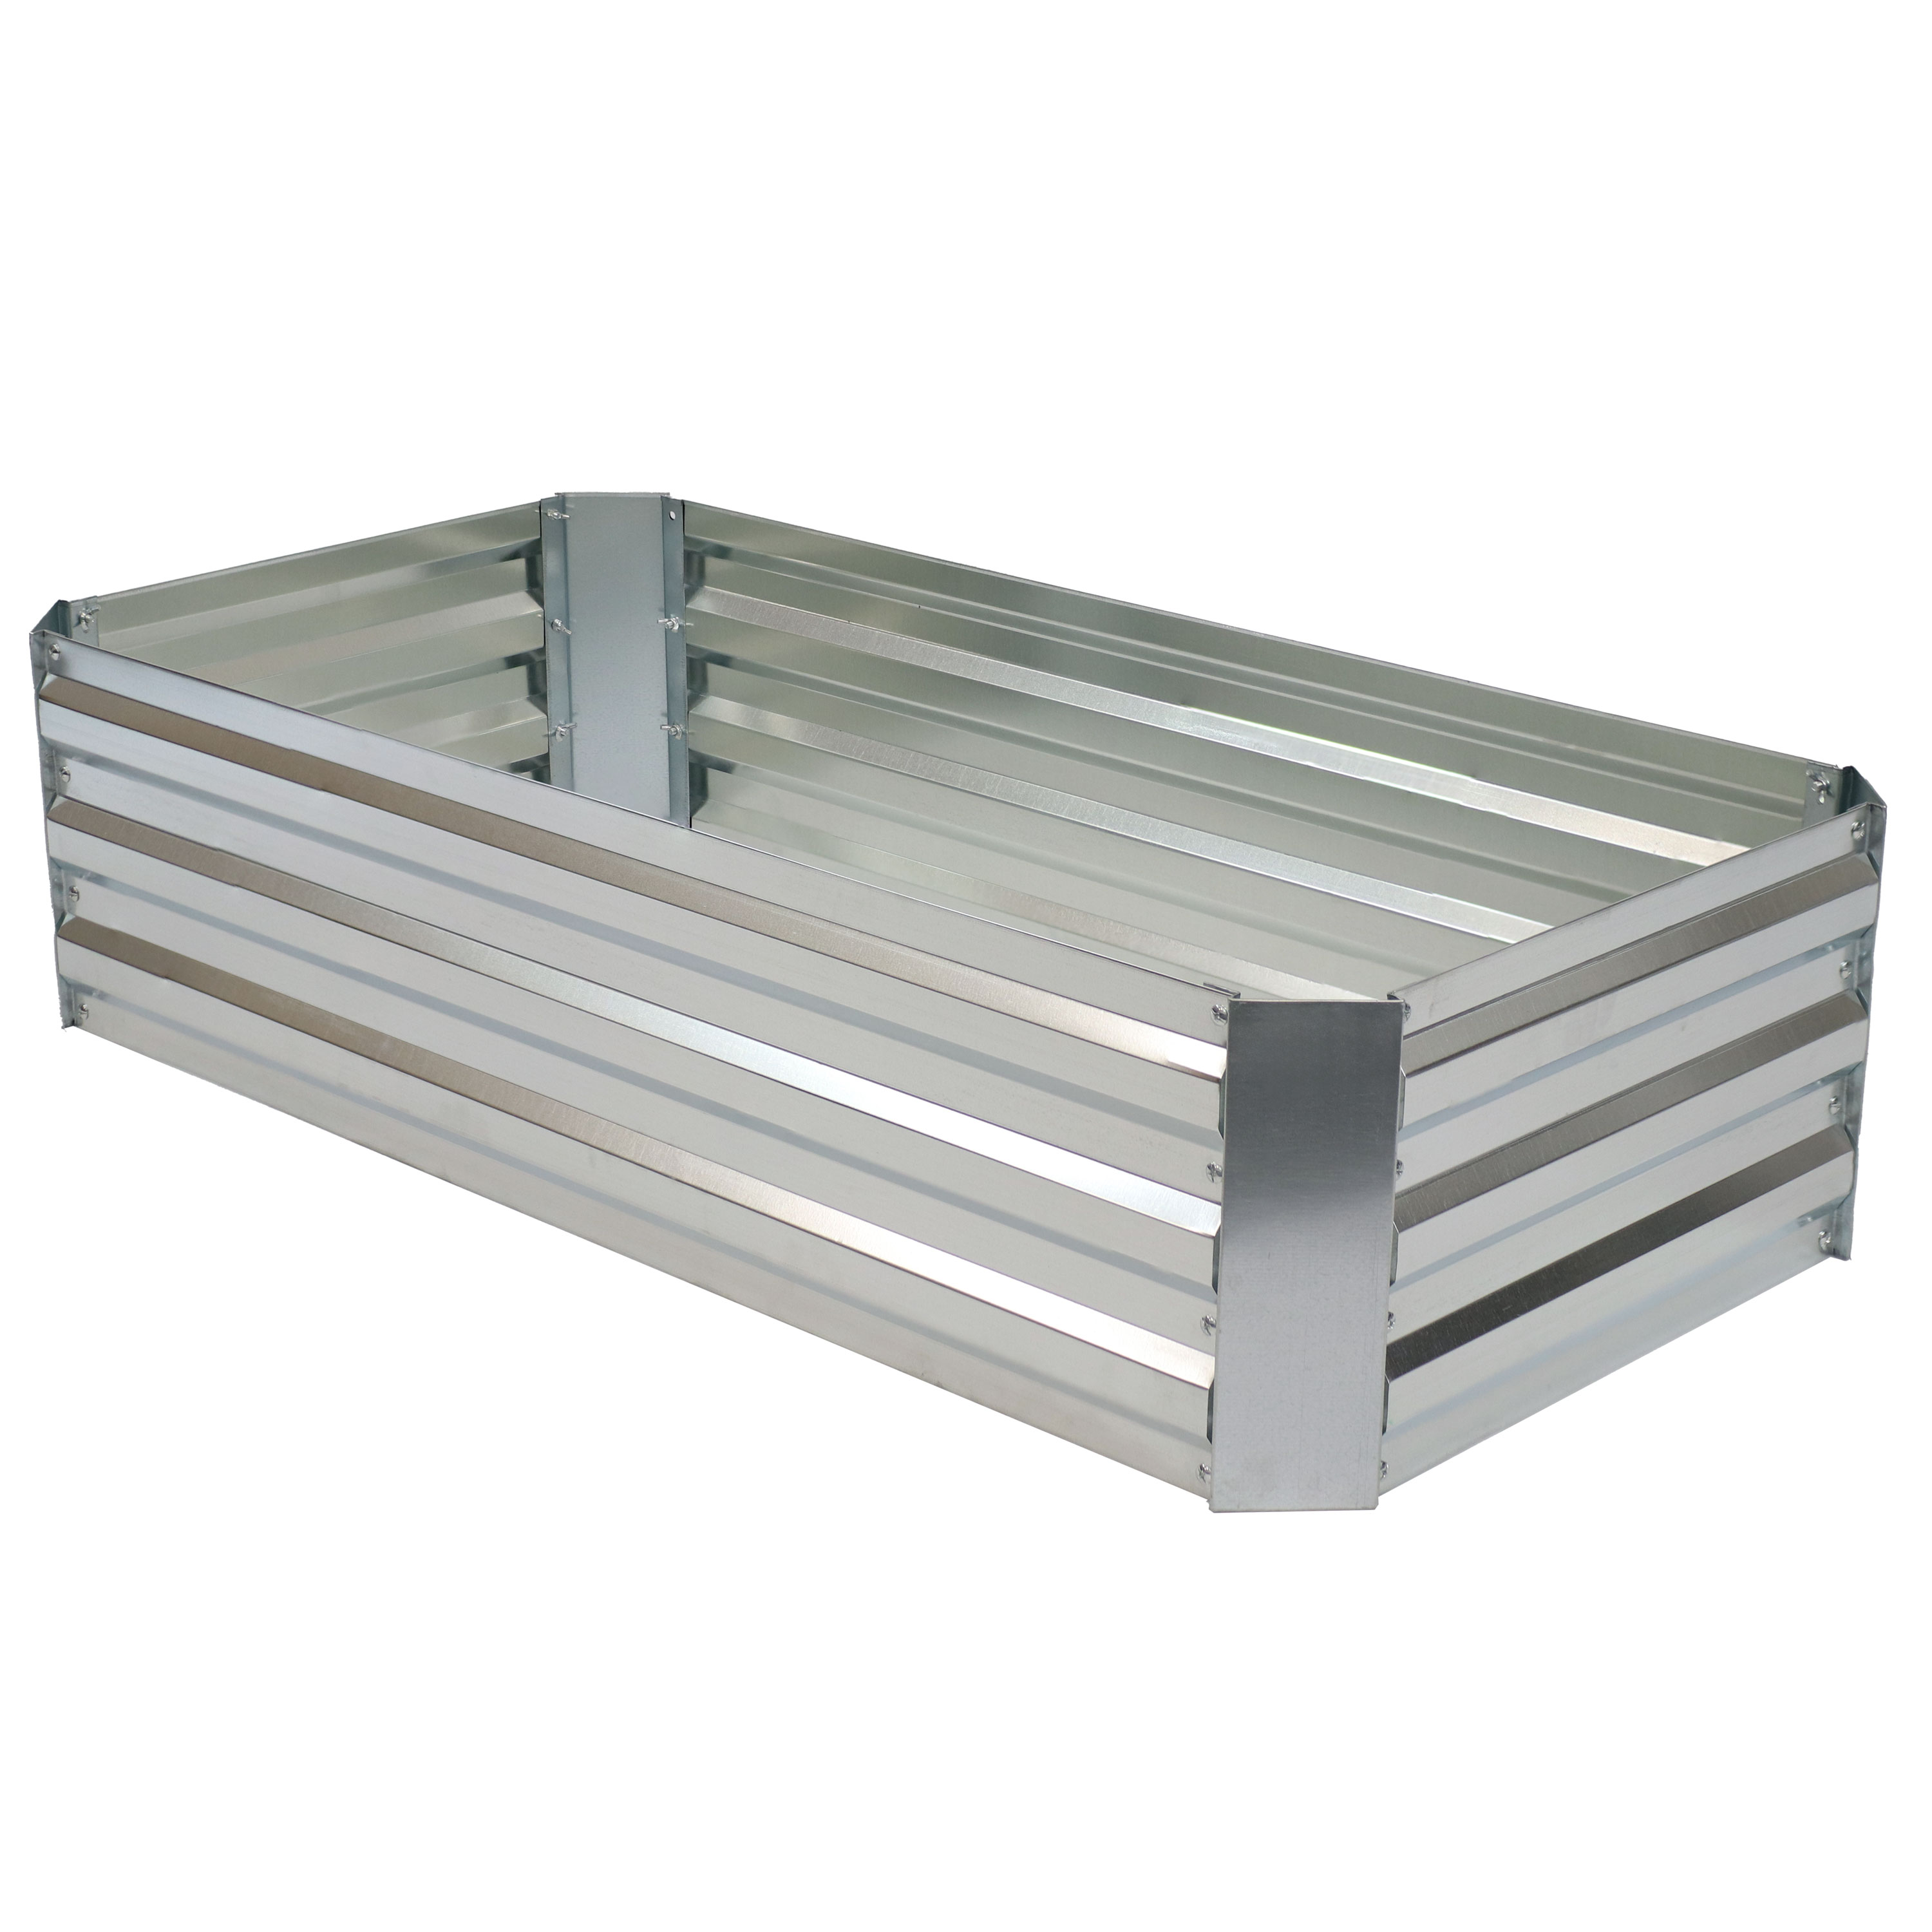 Rectangle Steel Raised Planter Bed - 4 x 2 ft - Silver